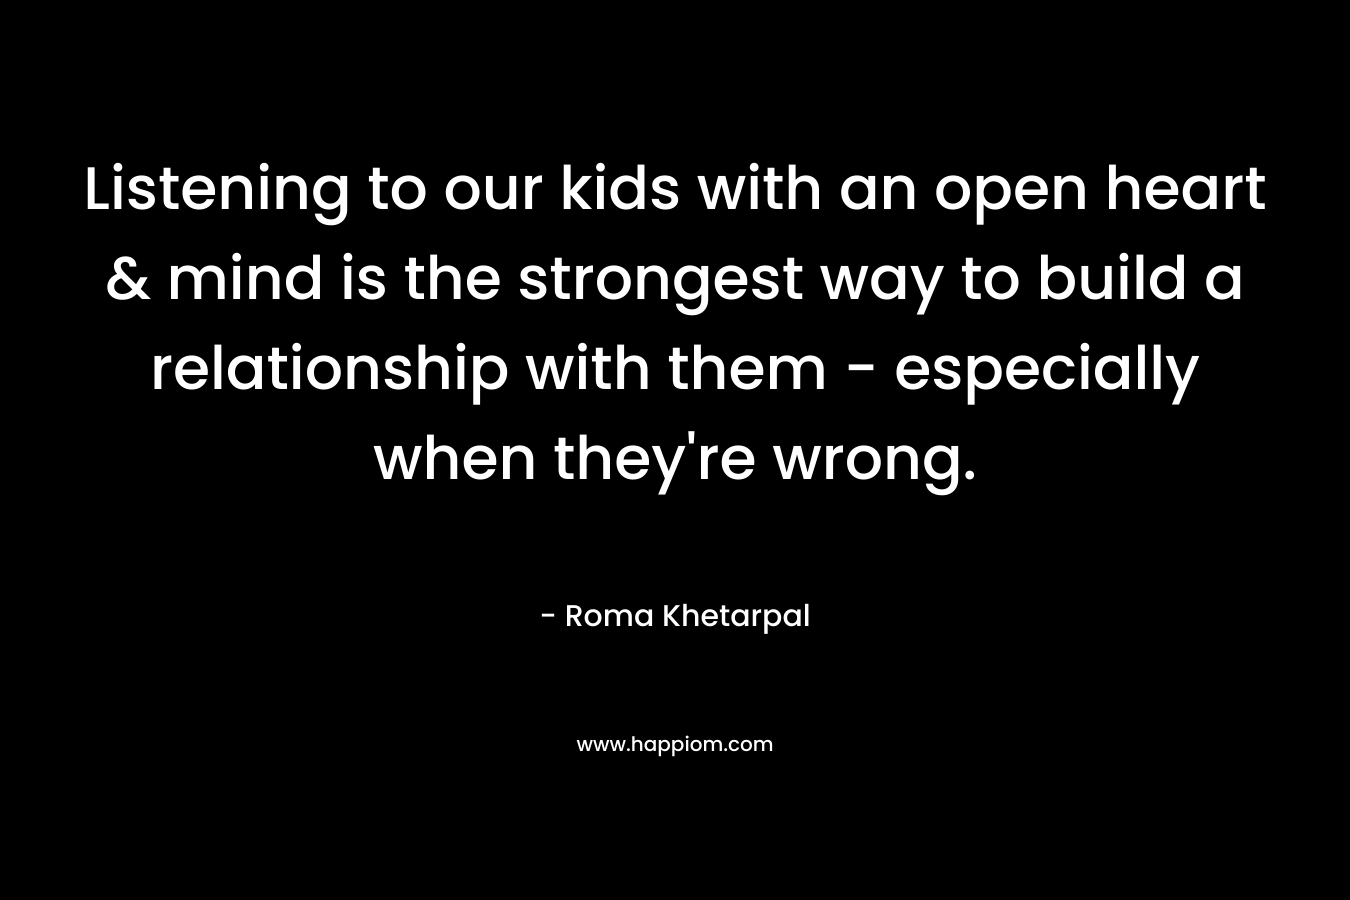 Listening to our kids with an open heart & mind is the strongest way to build a relationship with them – especially when they’re wrong. – Roma Khetarpal